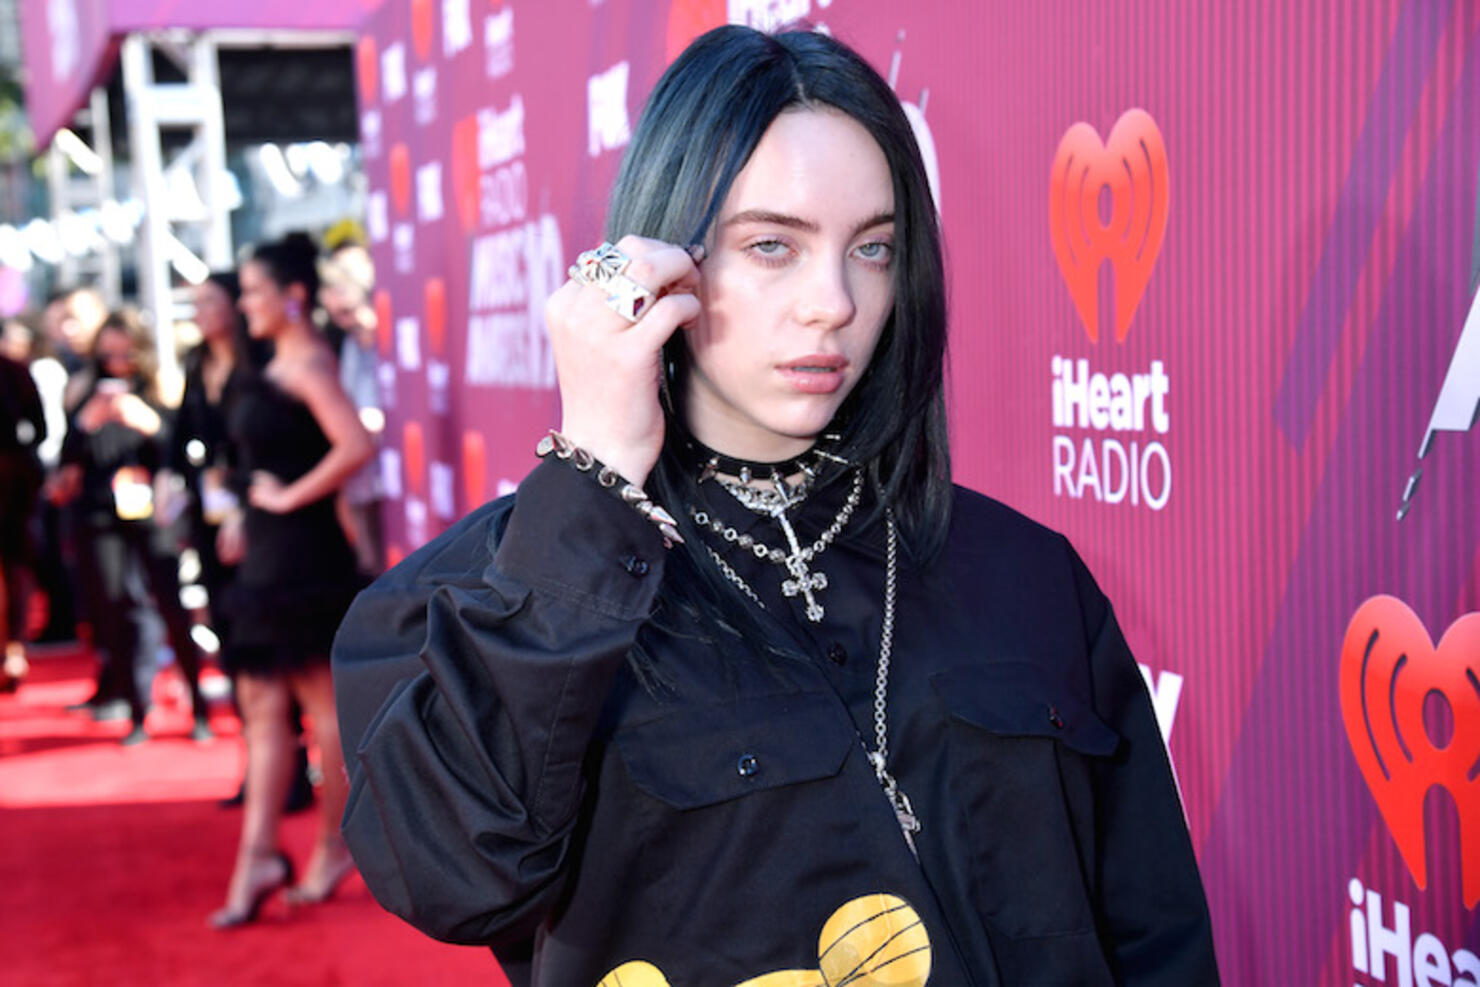 Billie Eilish's blue hair and outfit at the 2019 iHeartRadio Music Awards - wide 3